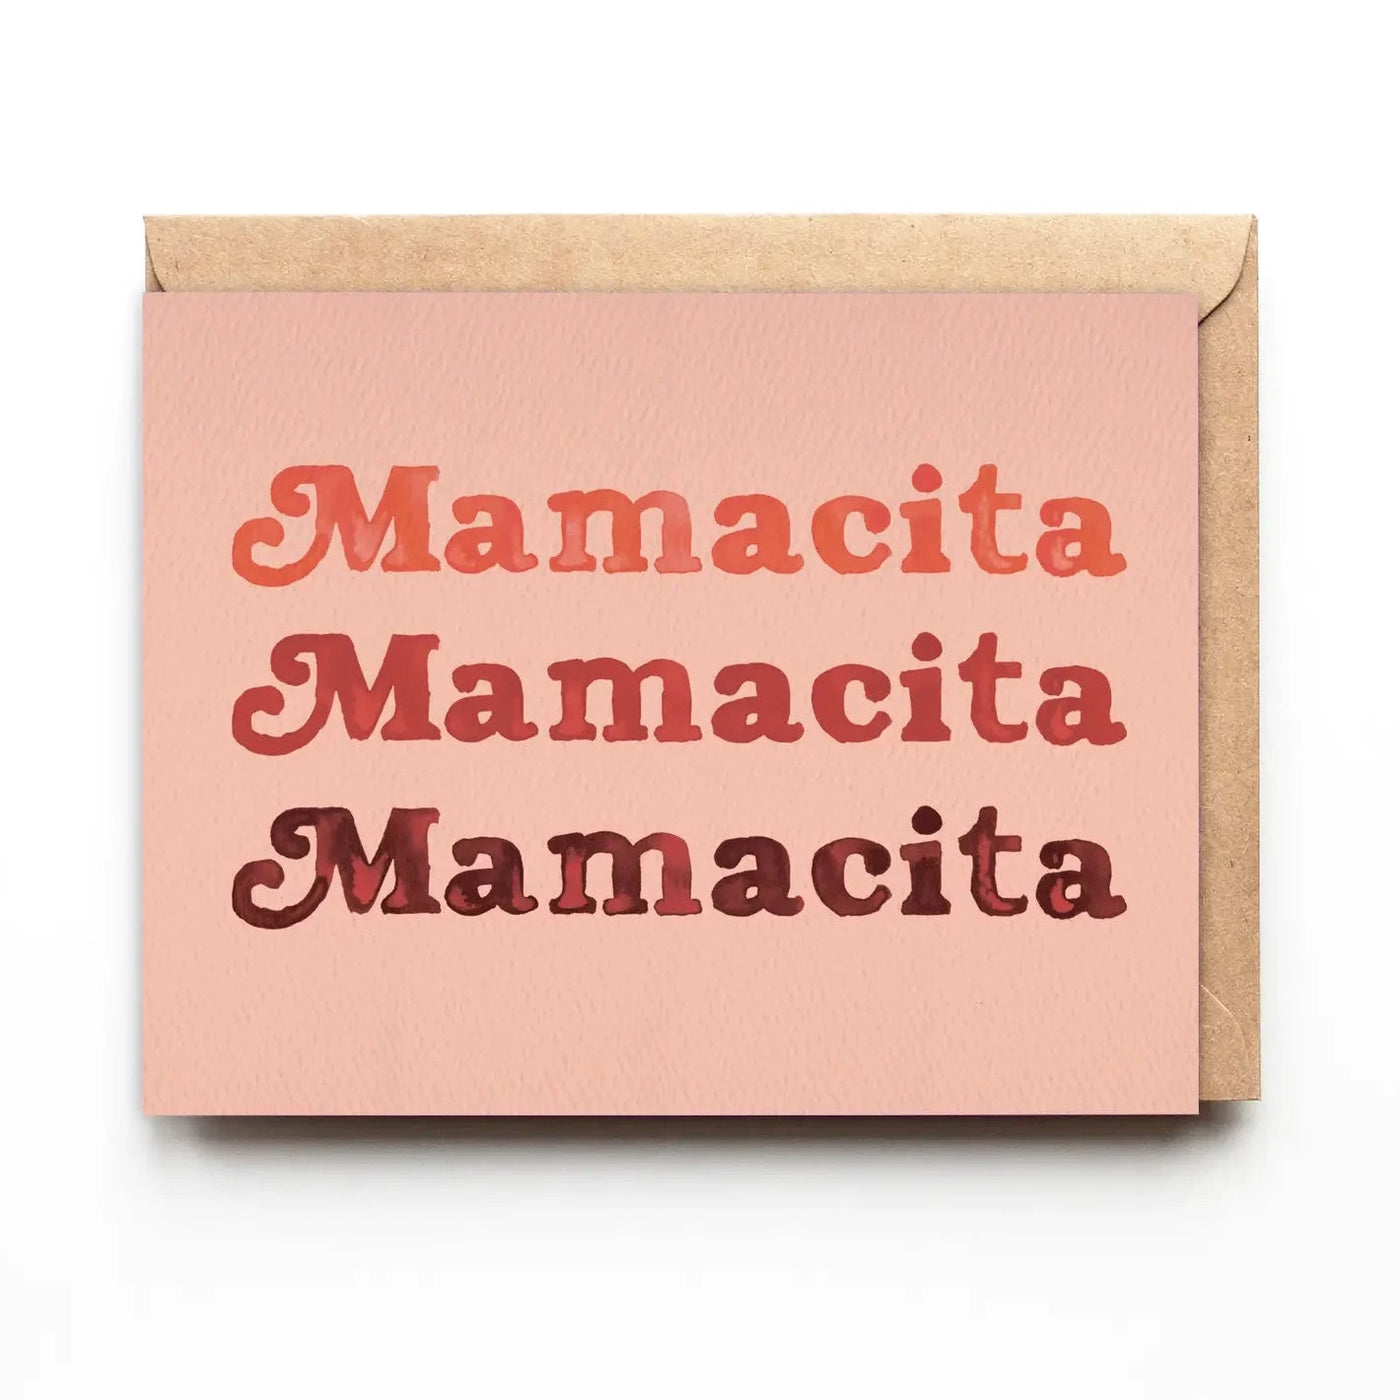 light coral greeting card with a brown envelope and the word Mamacita three times in different shades of pink/maroon colors.